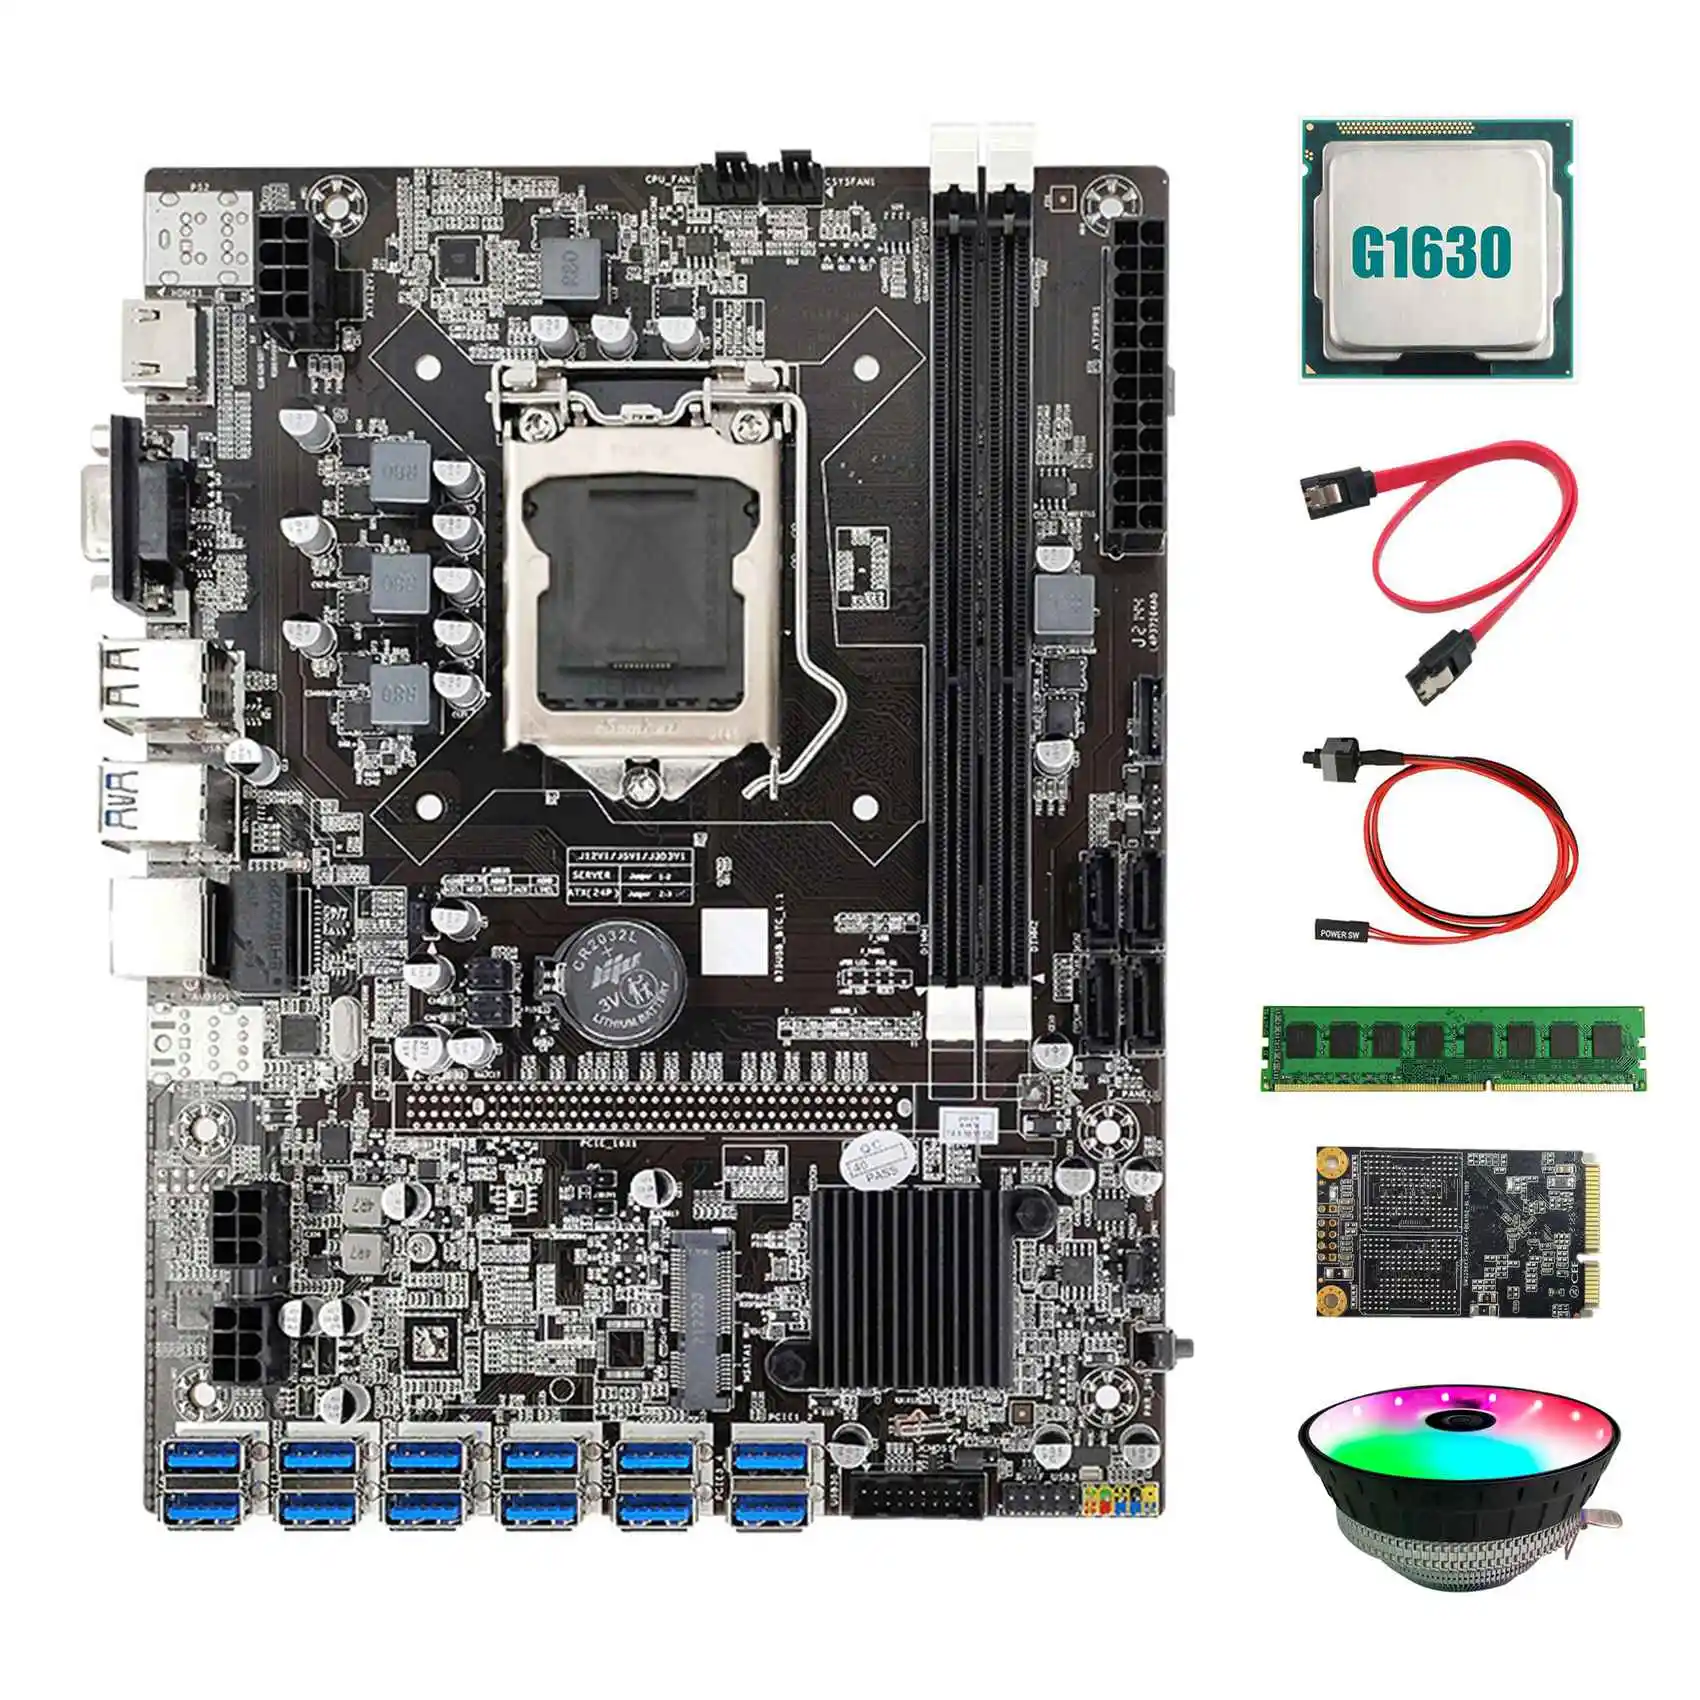 B75 BTC Mining Motherboard 12 USB+G1630 CPU+RGB Fan+DDR3 4GB 1600Mhz RAM+128G SSD+Switch Cable+SATA Cable Motherboard